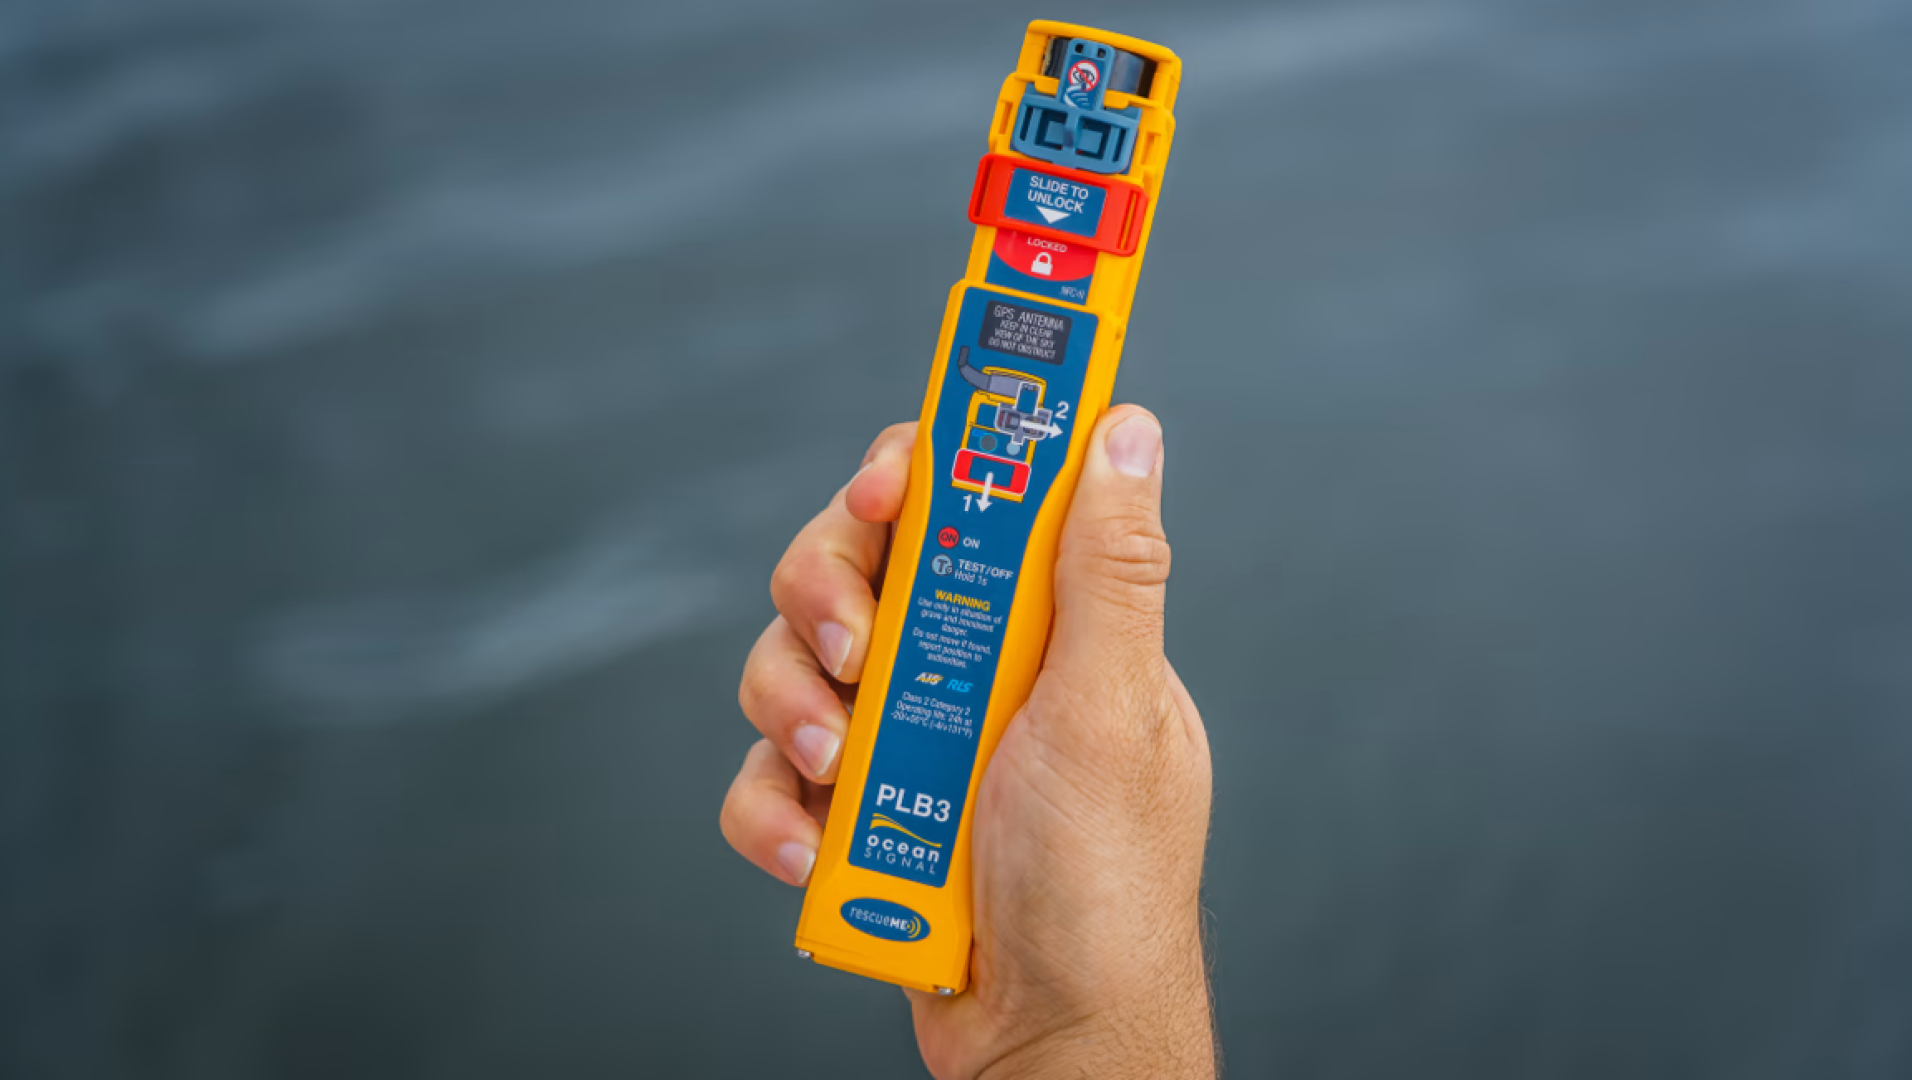 Award-Winning Ocean Signal rescueME PLB3 Personal Locator Beacon is Launched to Market